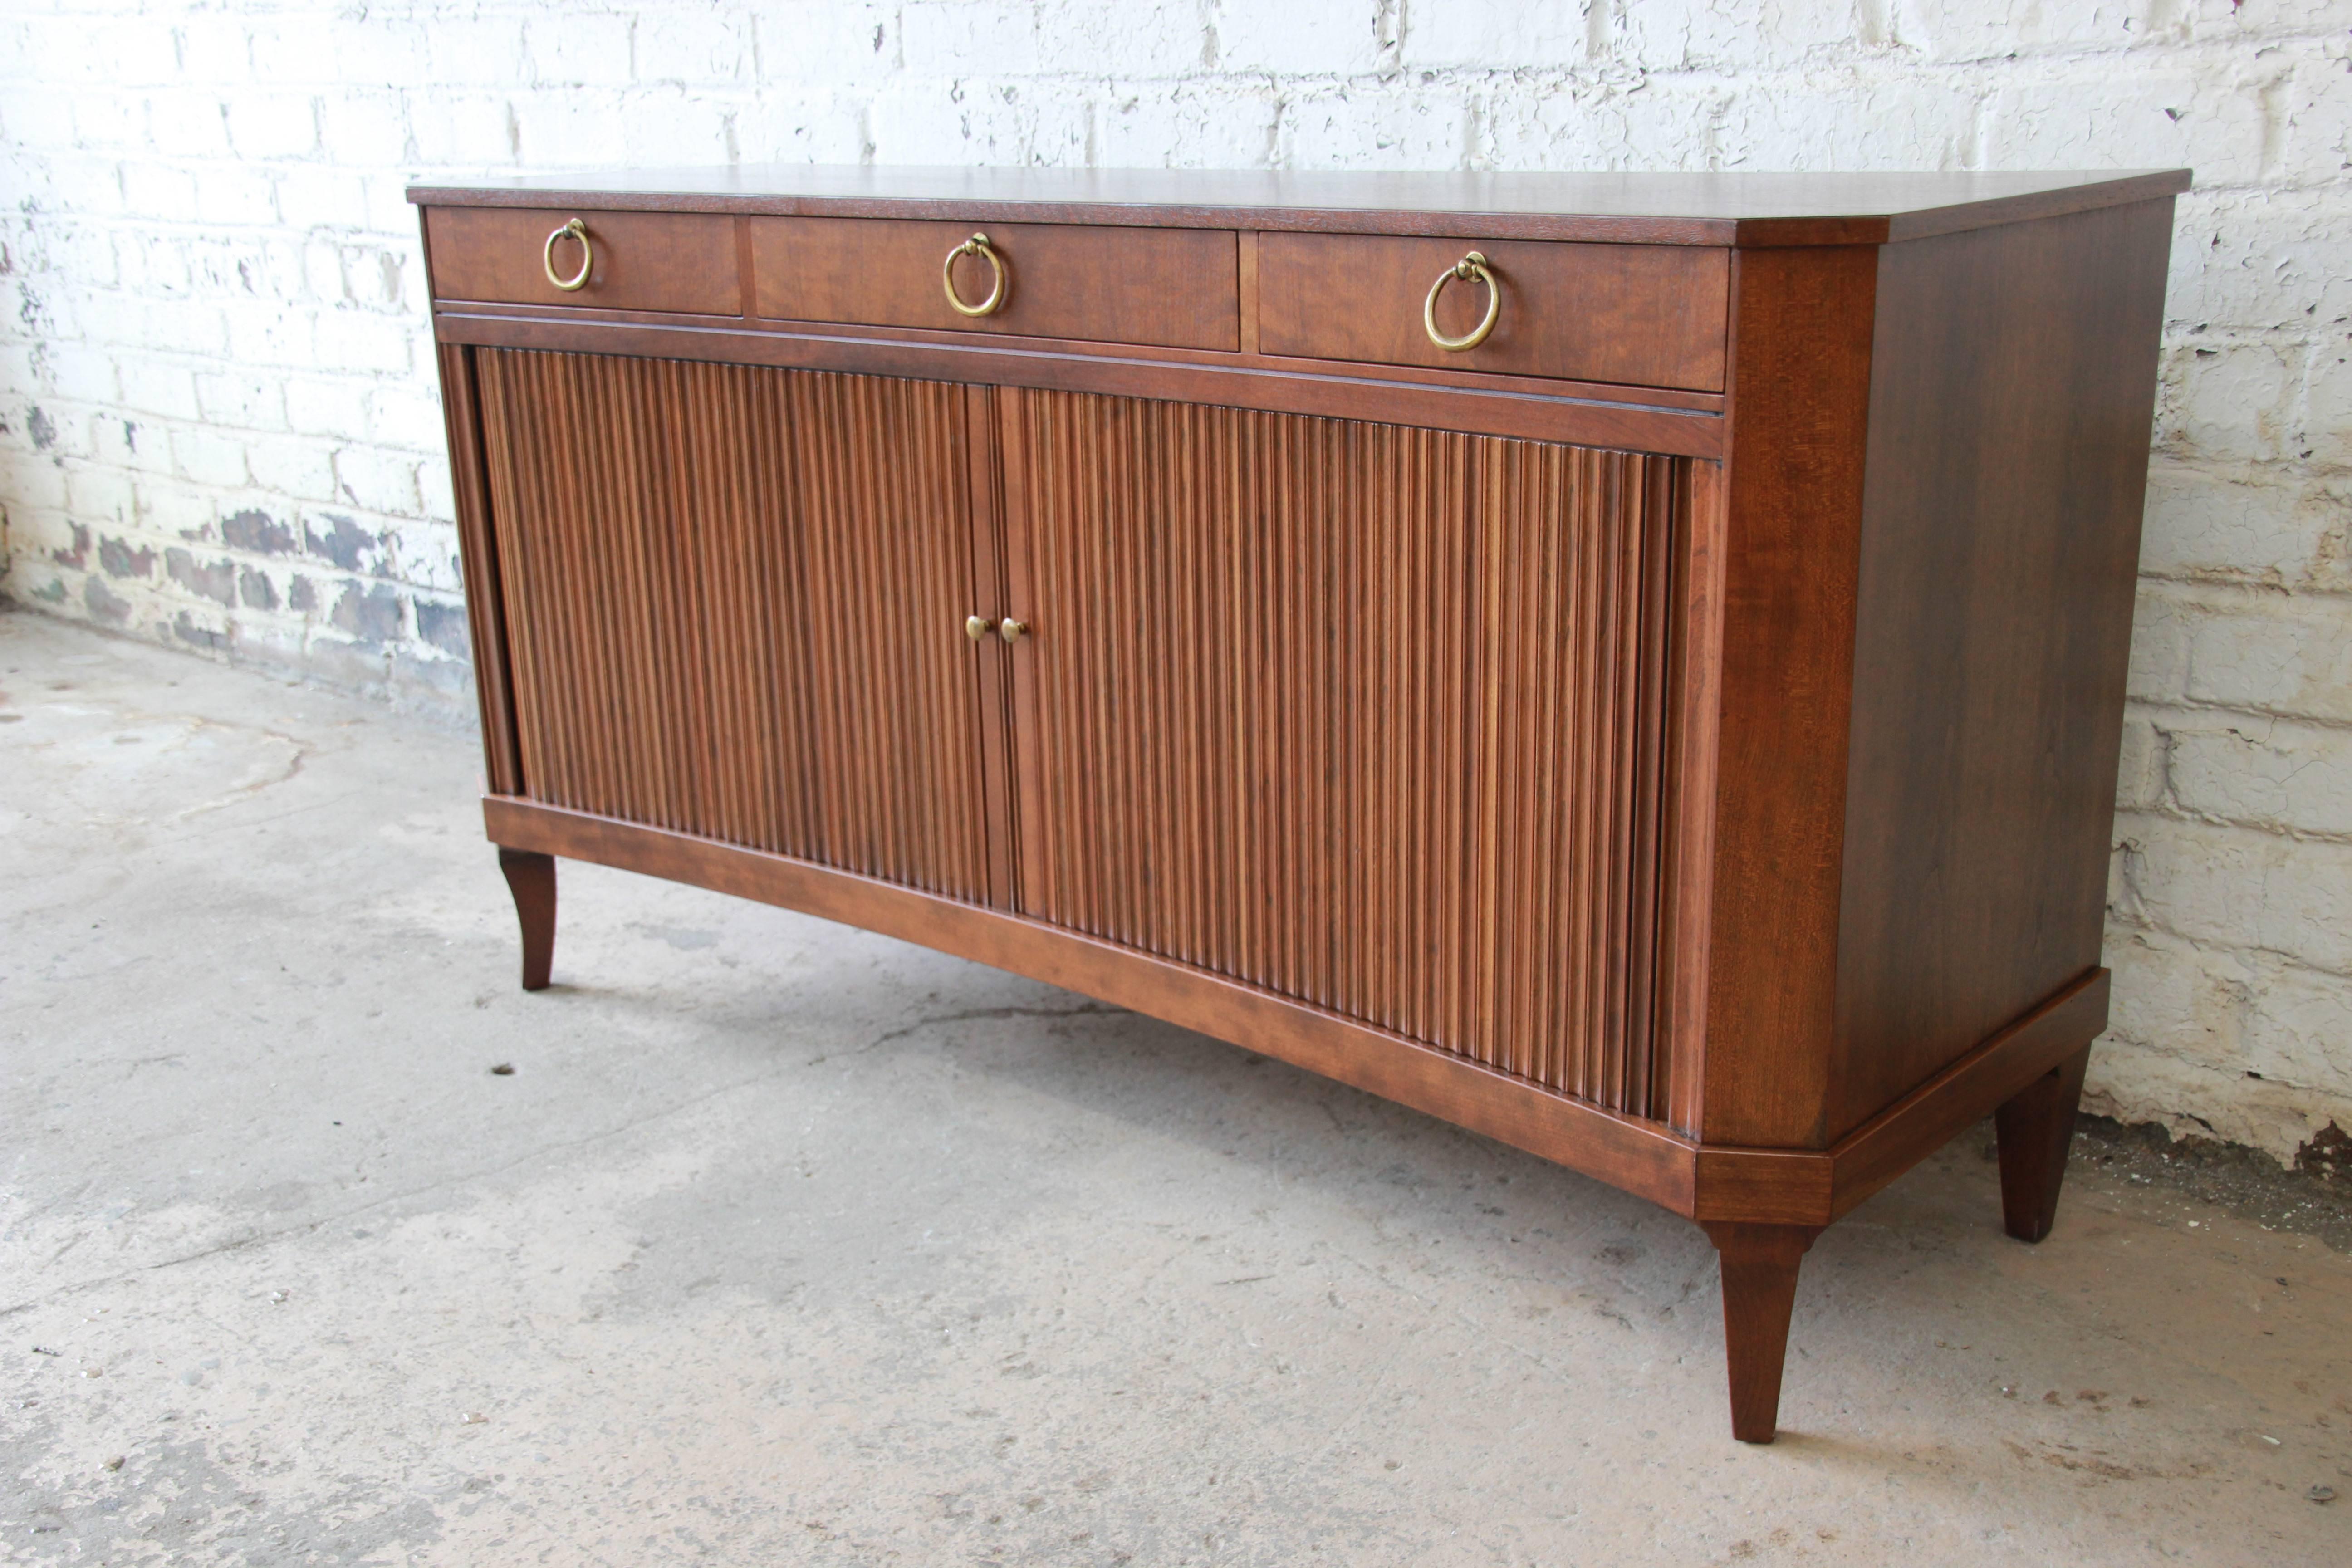 An exceptional midcentury Regency style curved front tambour door sideboard or credenza designed by Michael Taylor for Baker Furniture. The credenza is made from solid fruitwood and features a curved front with canted corners and beautiful tambour